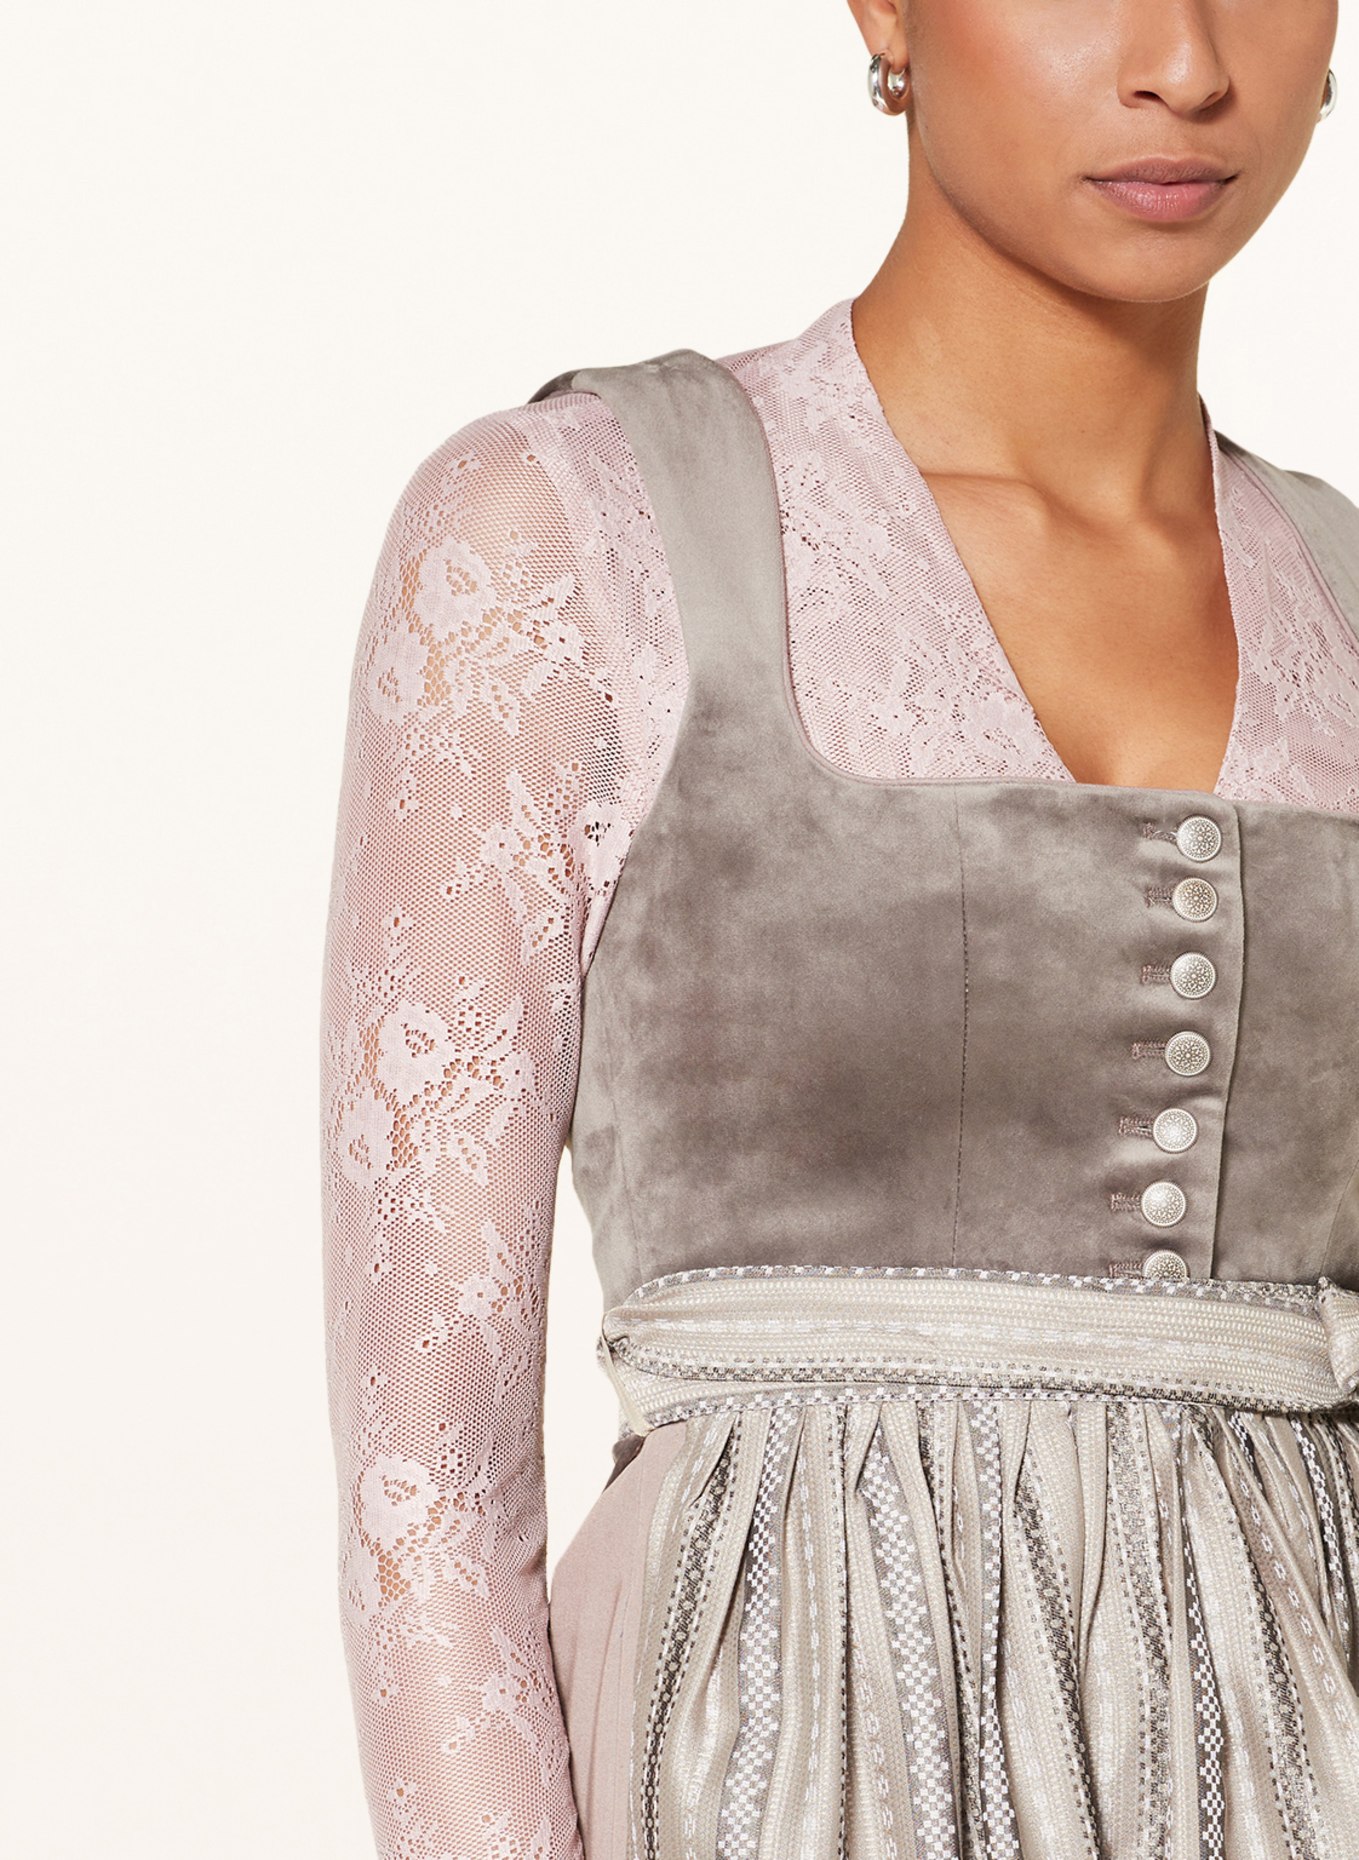 BERWIN & WOLFF Dirndl blouse made of lace, Color: ROSE (Image 3)